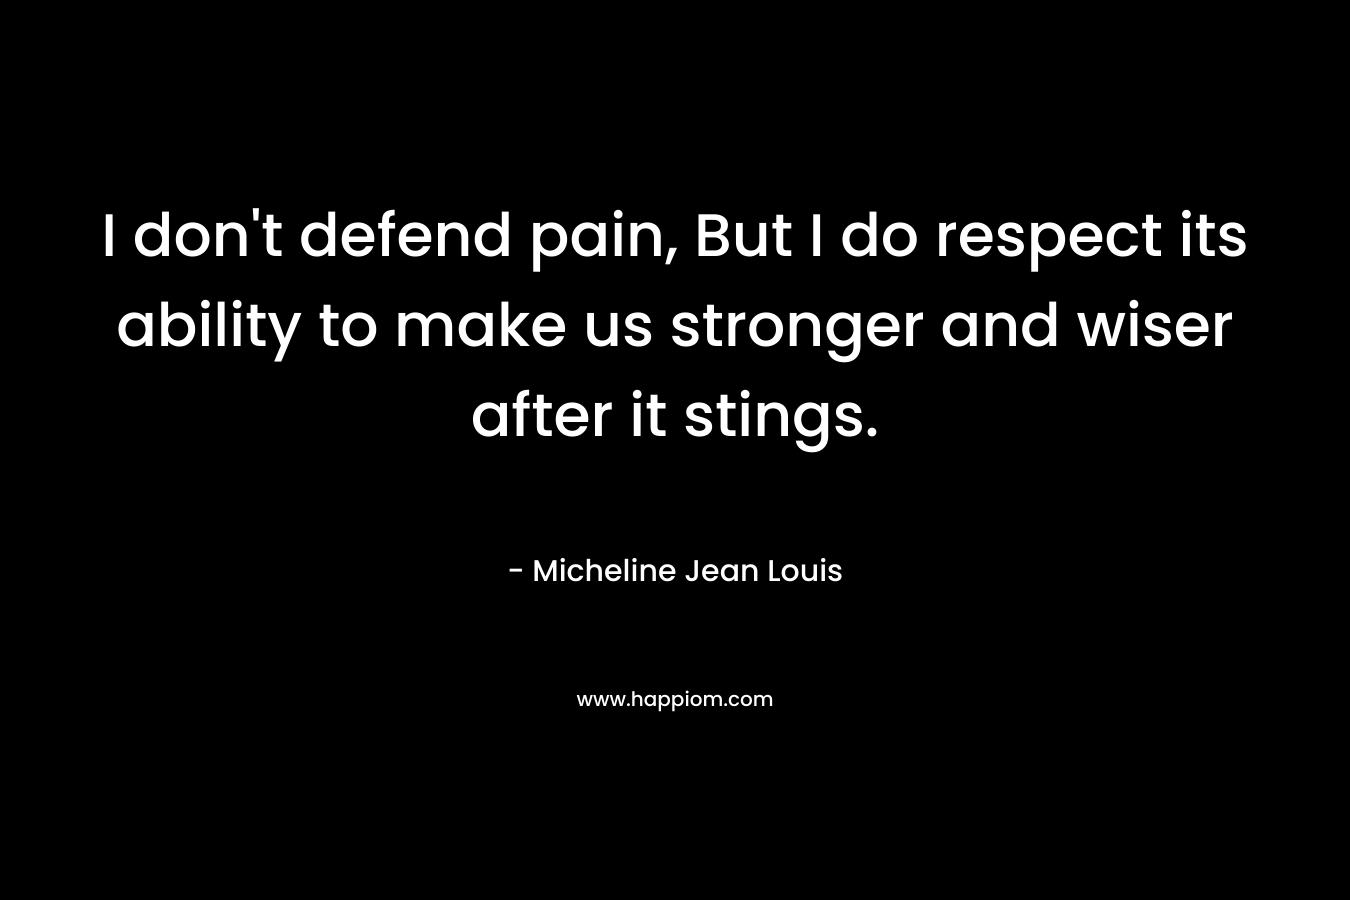 I don't defend pain, But I do respect its ability to make us stronger and wiser after it stings.